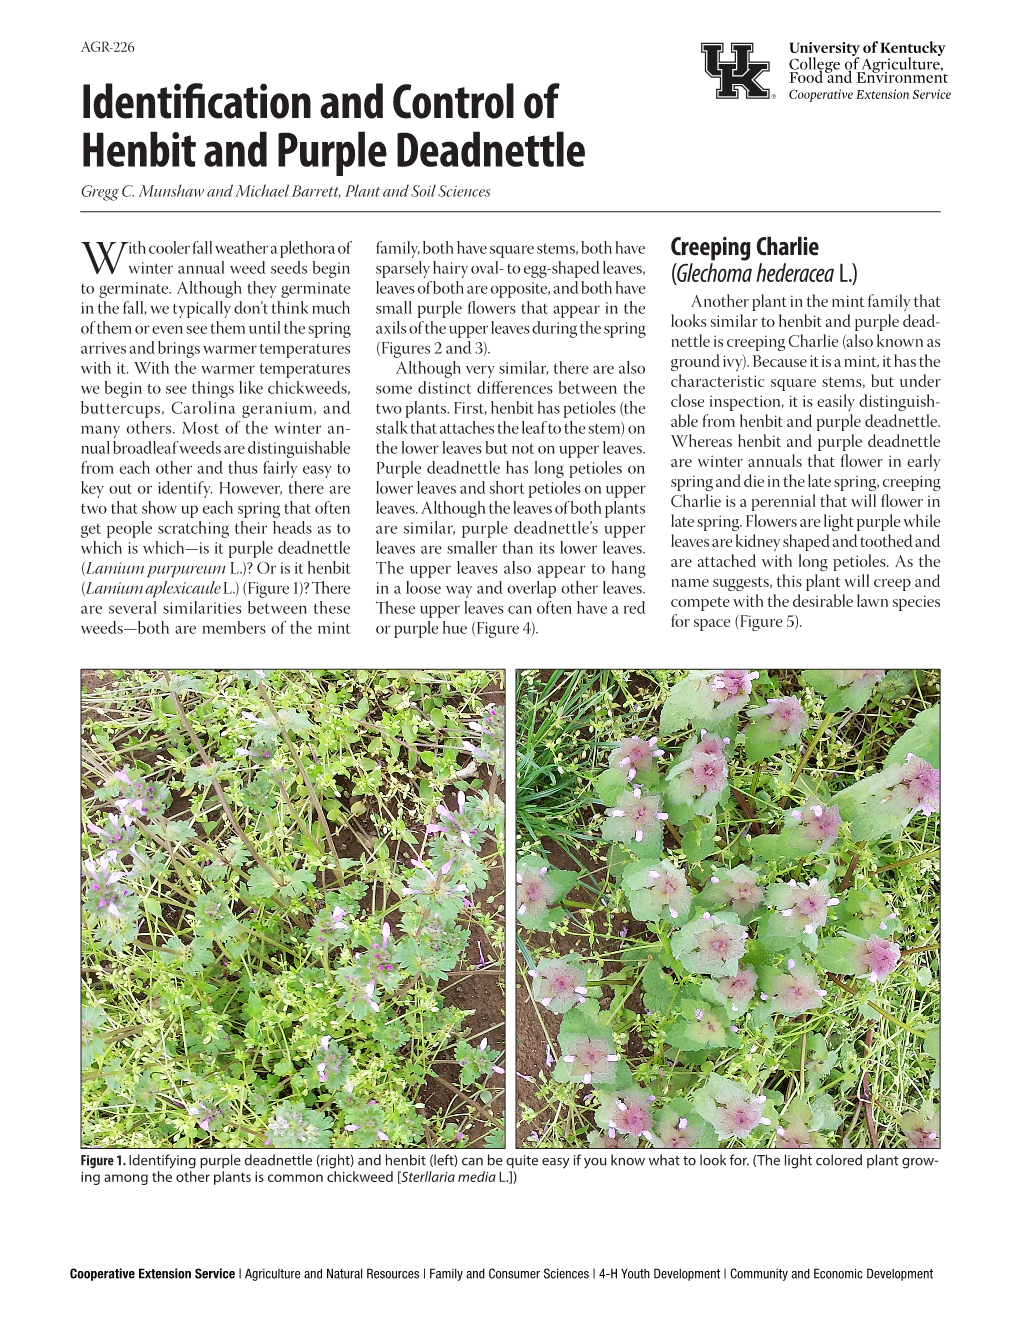 Identification and Control of Henbit and Purple Deadnettle